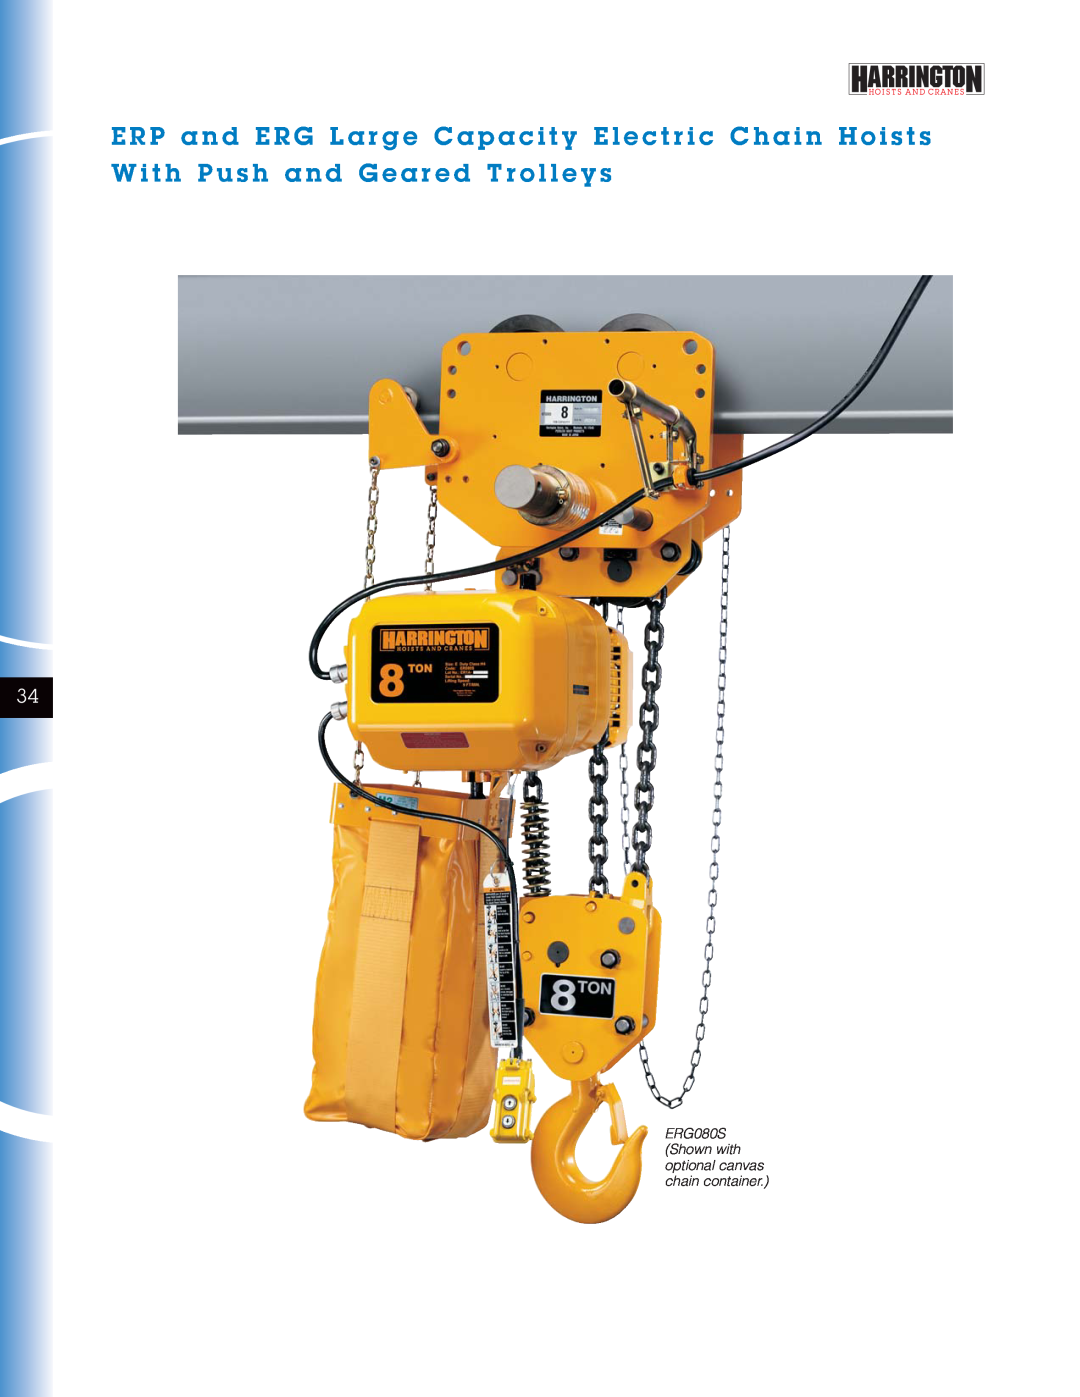 Harrington Hoists NER manual ERG080S Shown with optional canvas chain container 